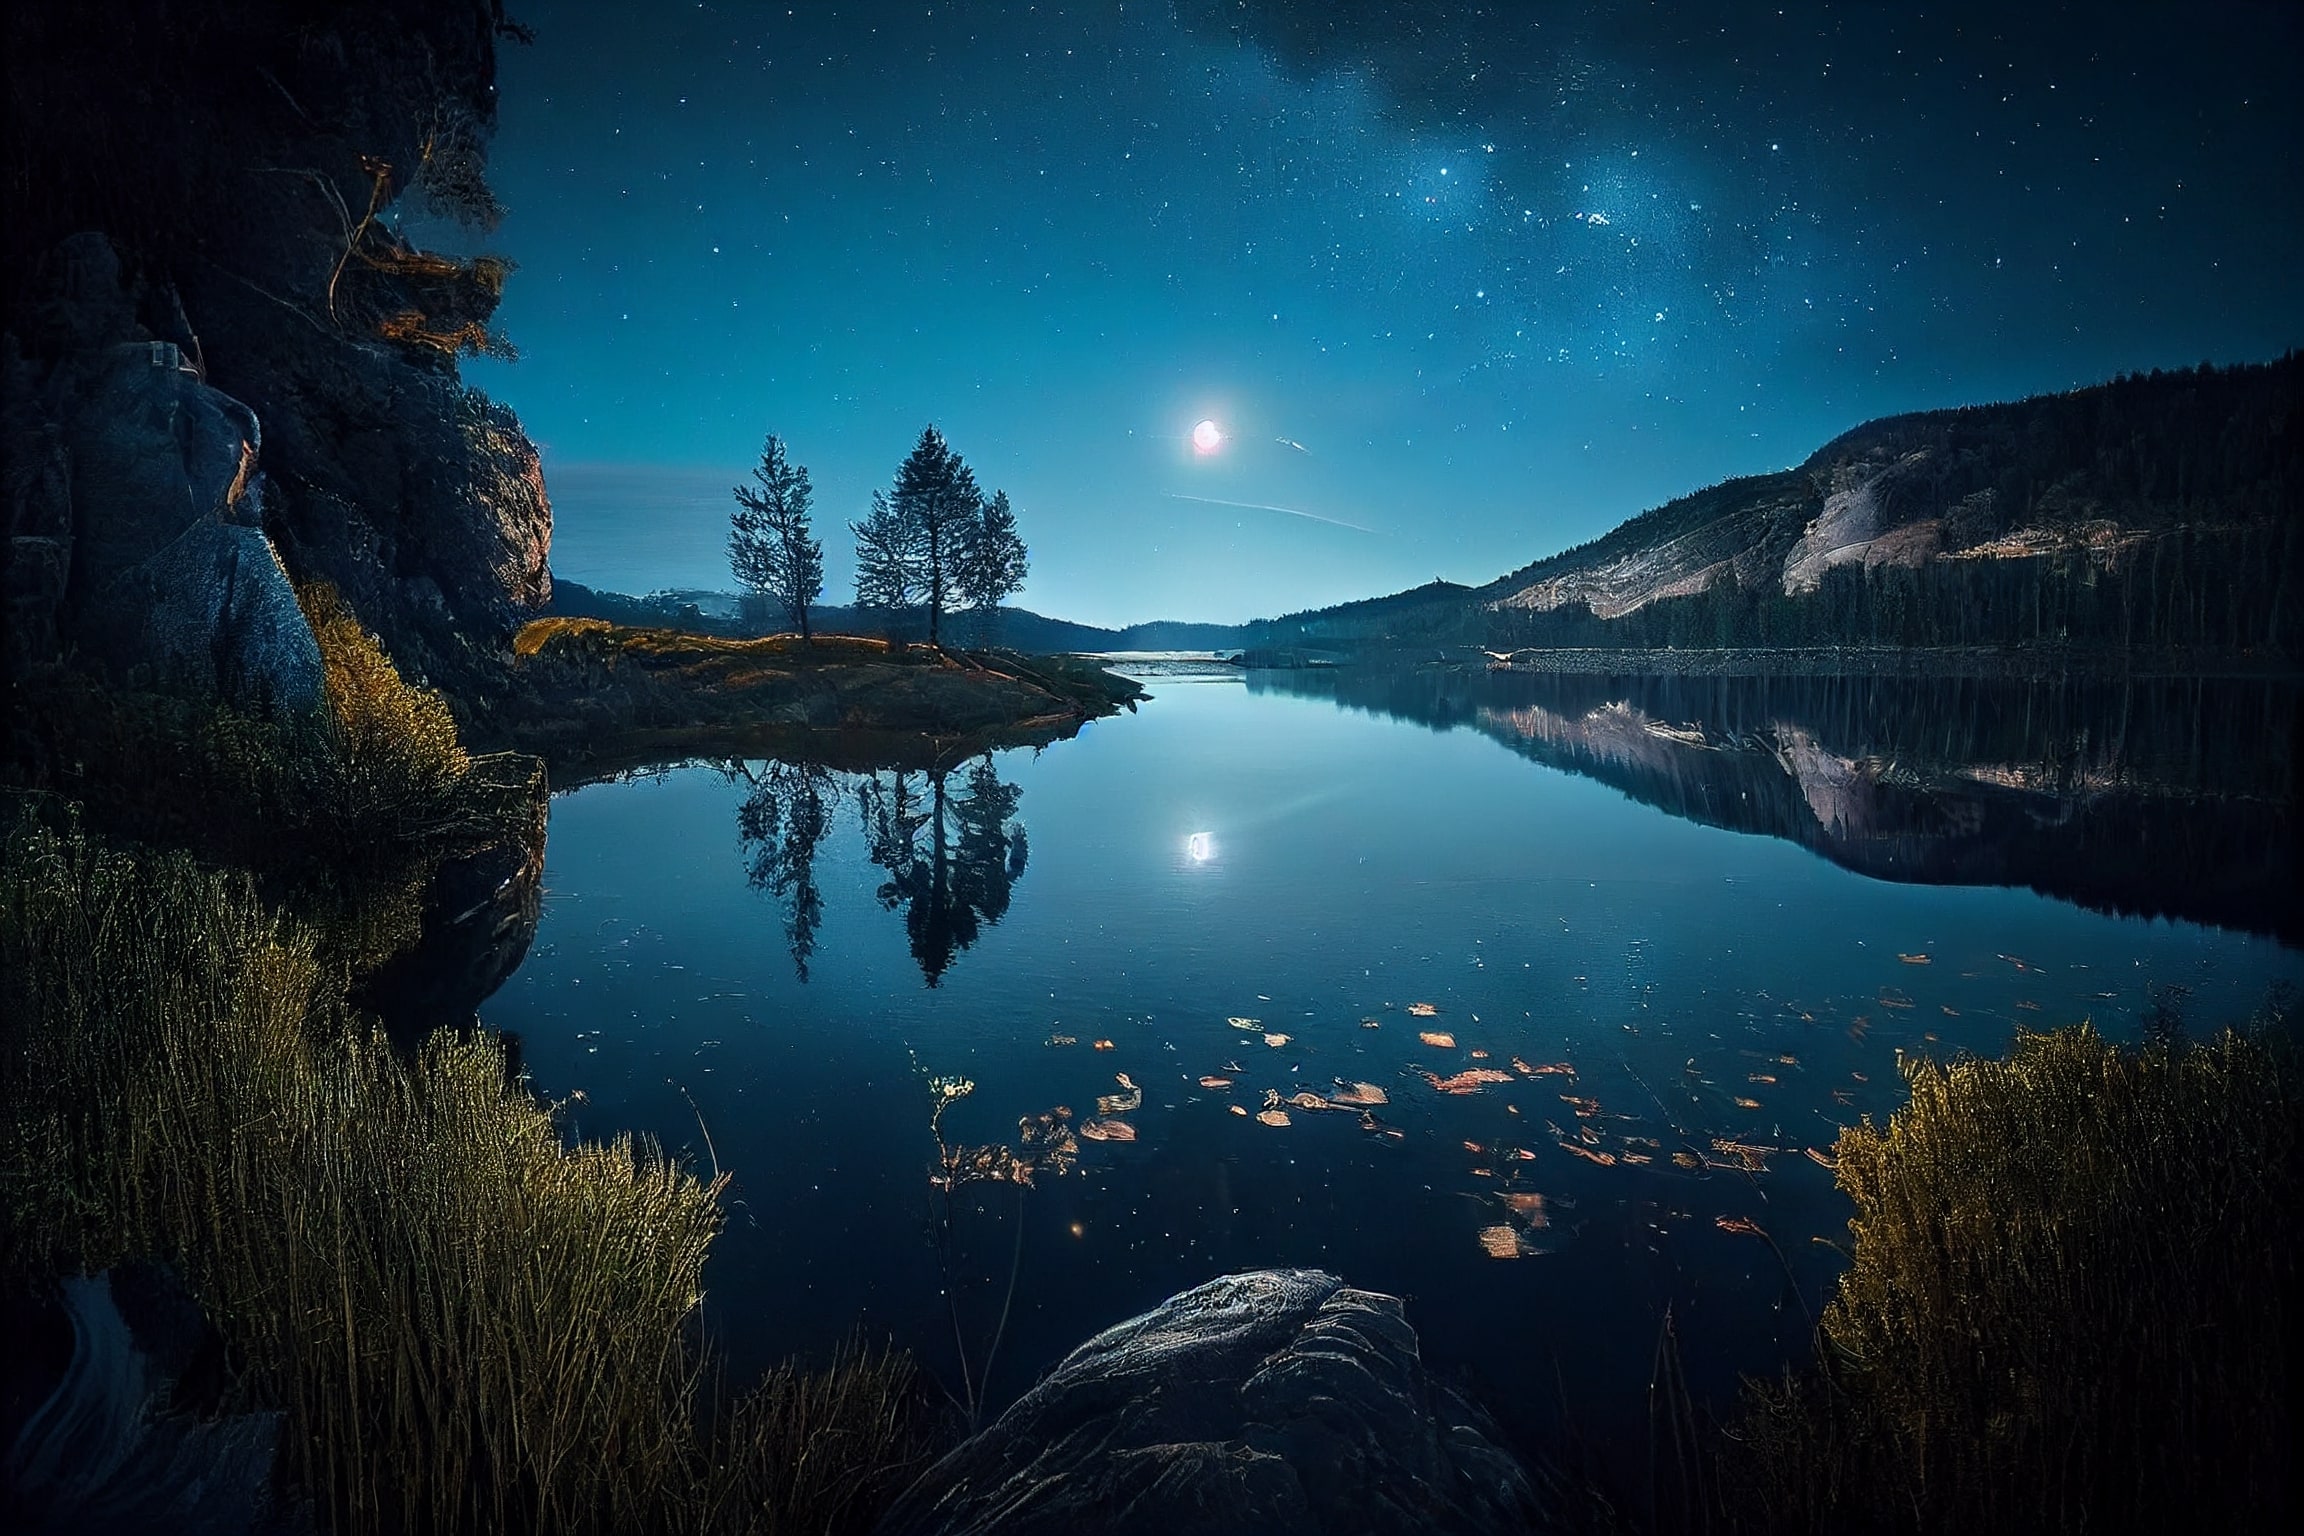 Lake at night with a full moon in the sky.